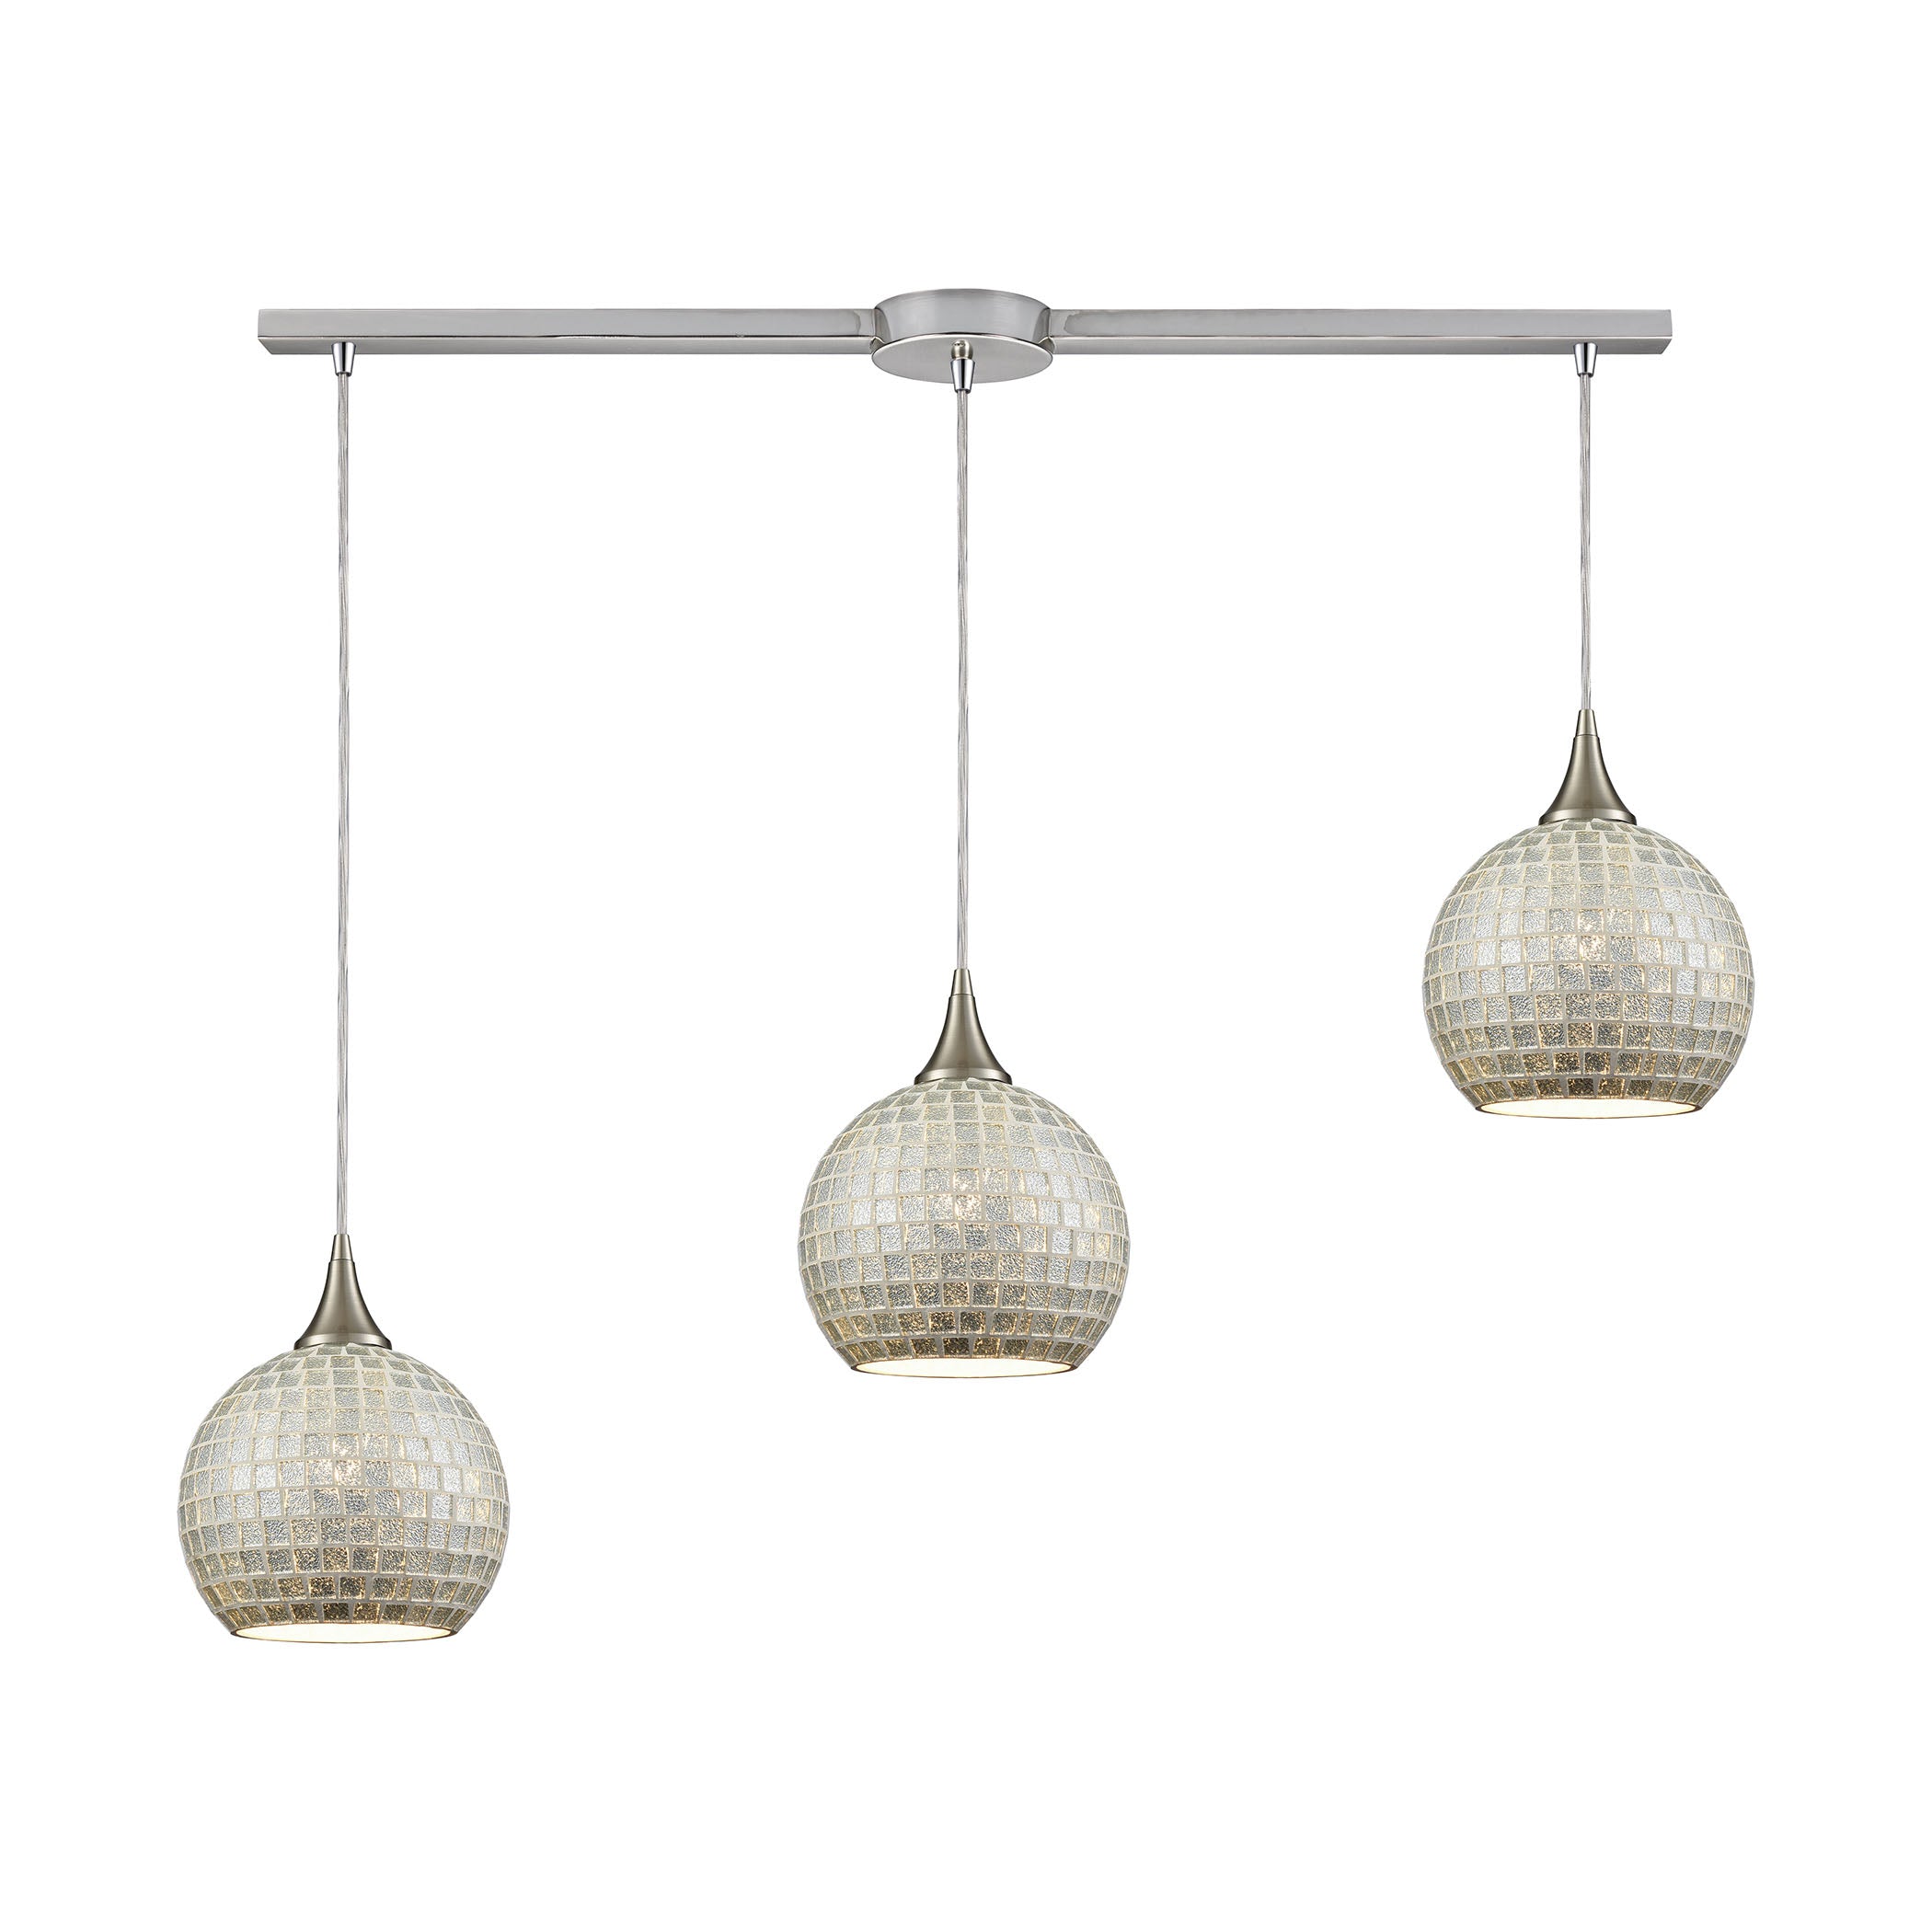 ELK Lighting 529-3L-SLV Fusion 3-Light Linear Mini Pendant Fixture in Satin Nickel with Silver Mosaic Glass